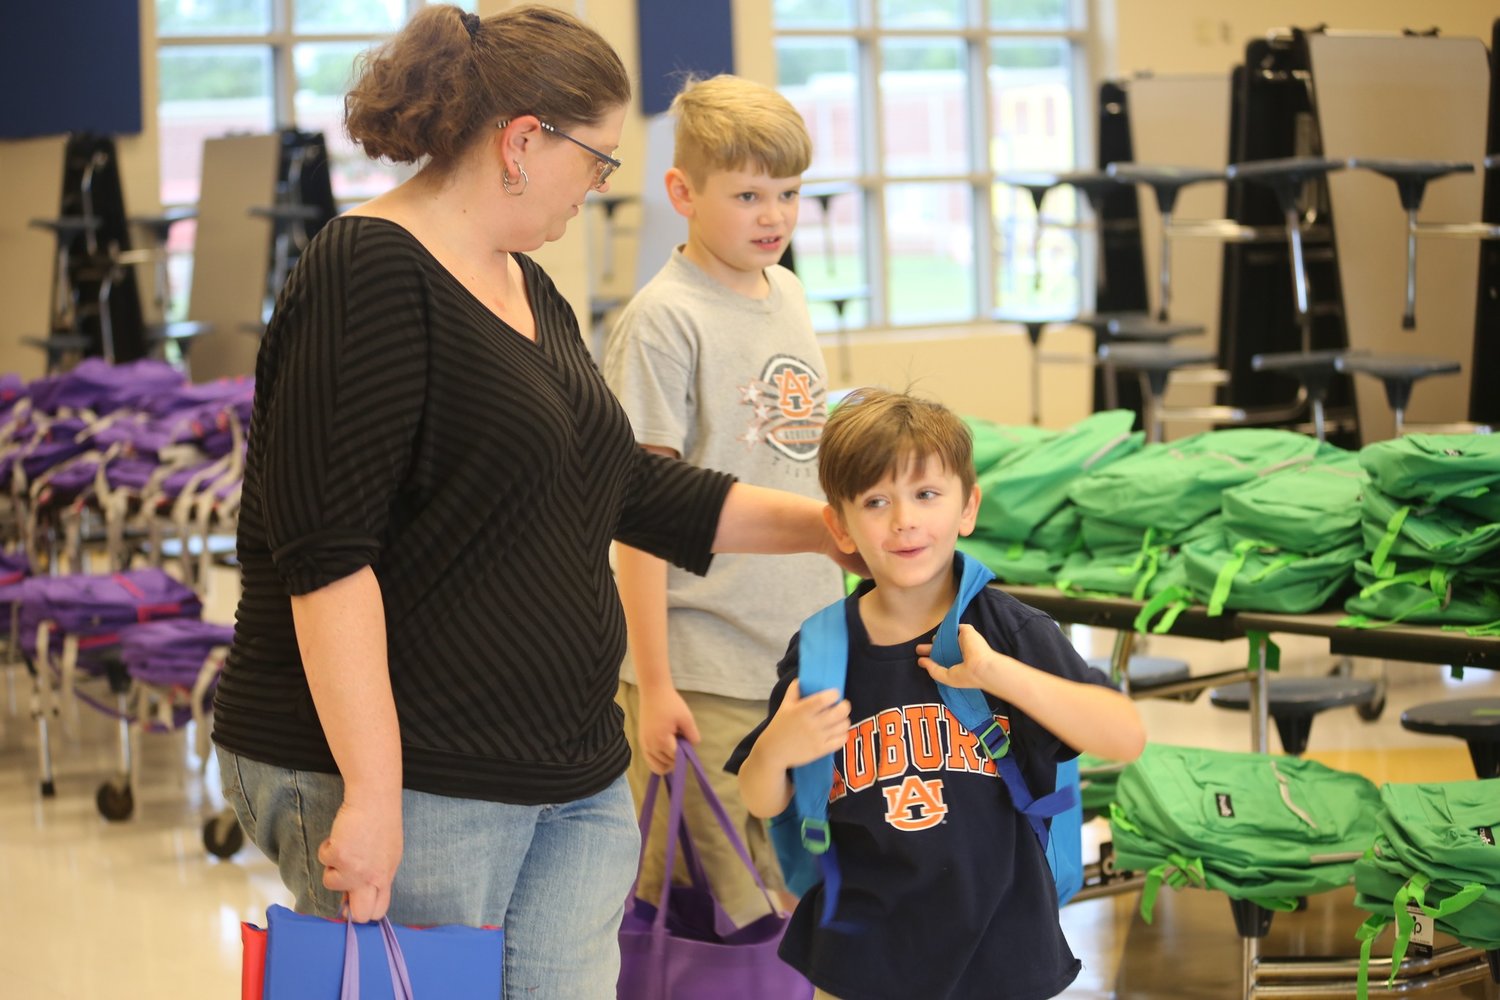 Over 900 students at Foley Elementary School found a special surprise waiting for them during their Meet the Teacher event on Monday, Aug. 8. Andy Citrin’s Project Backpack came to the school to deliver hundreds of backpacks stuffed with school supplies to the students.